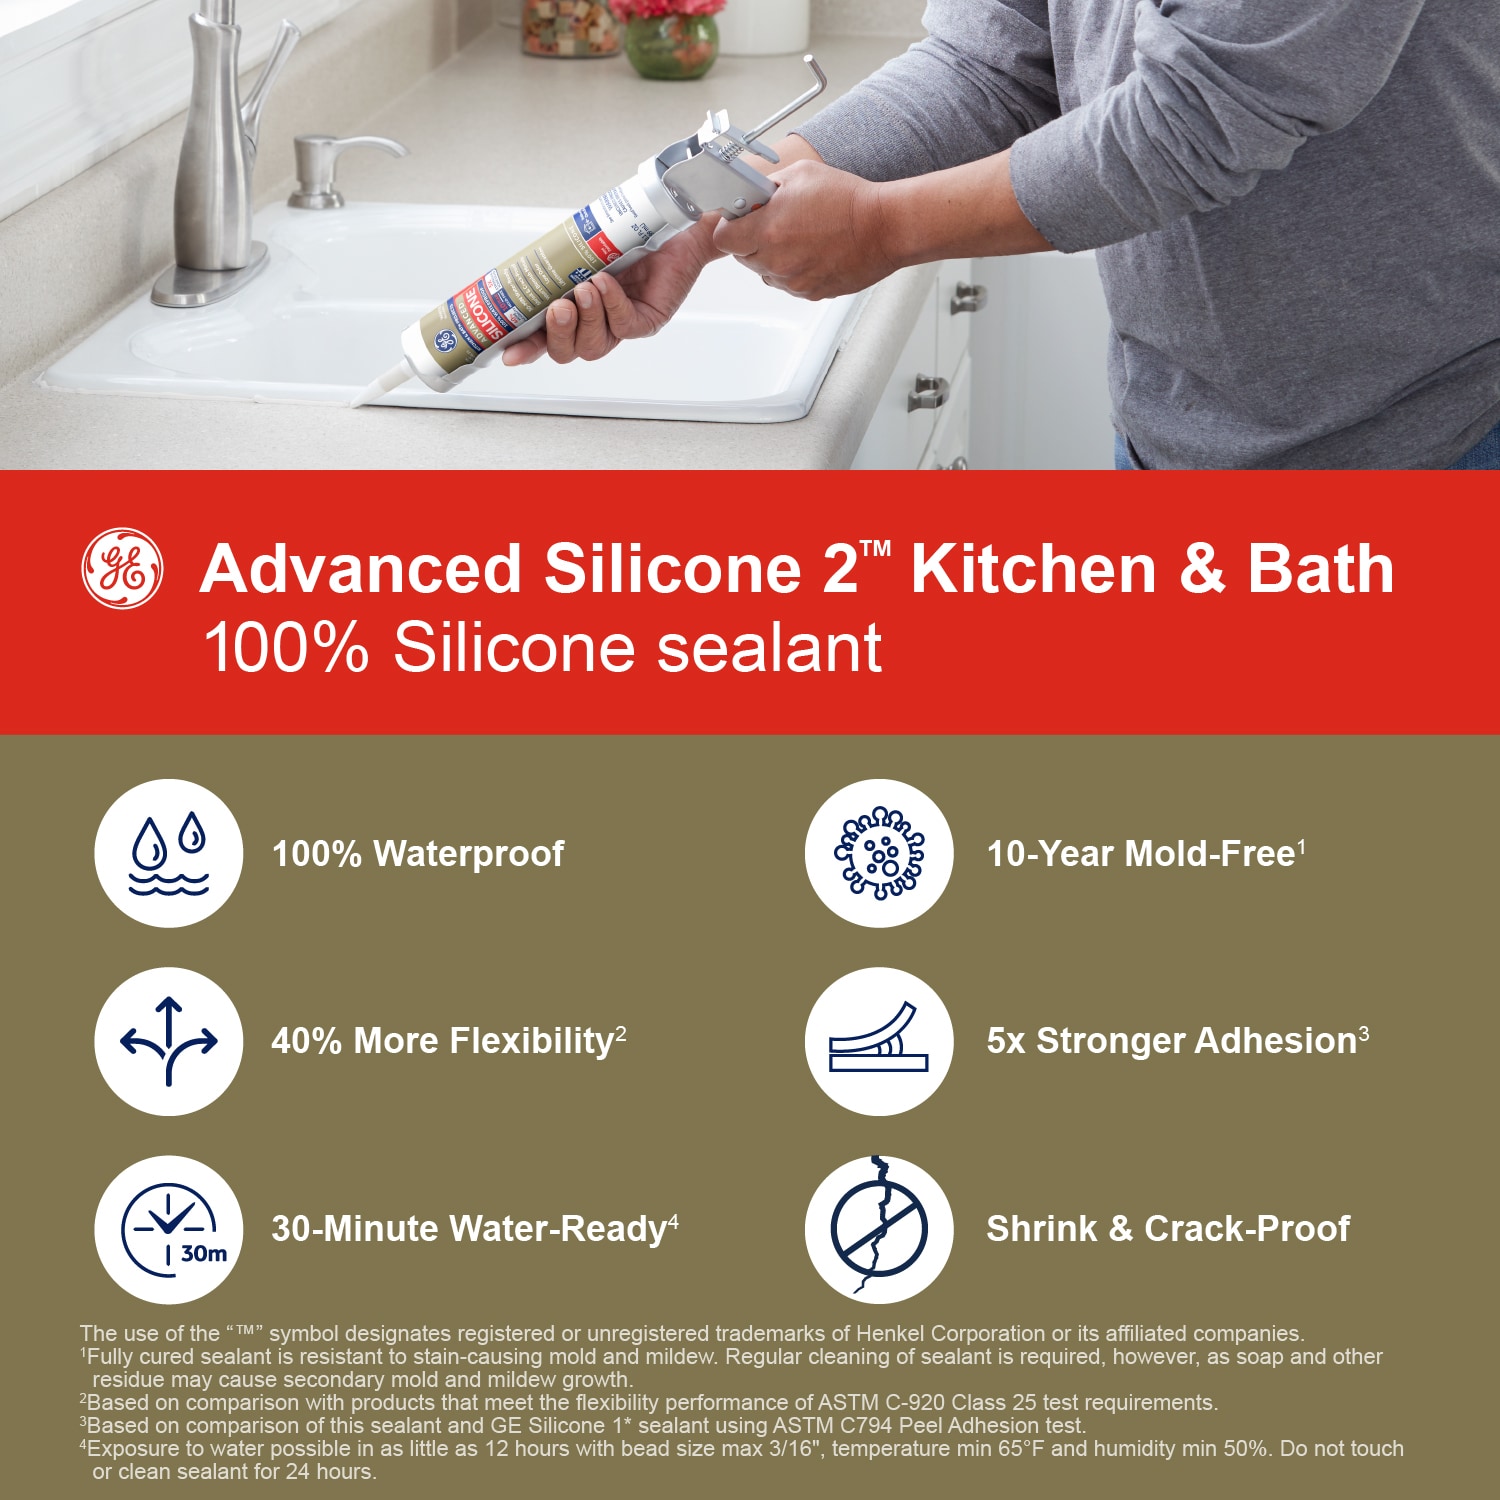 I-100: Silicone Paste - Silicone Coloring System